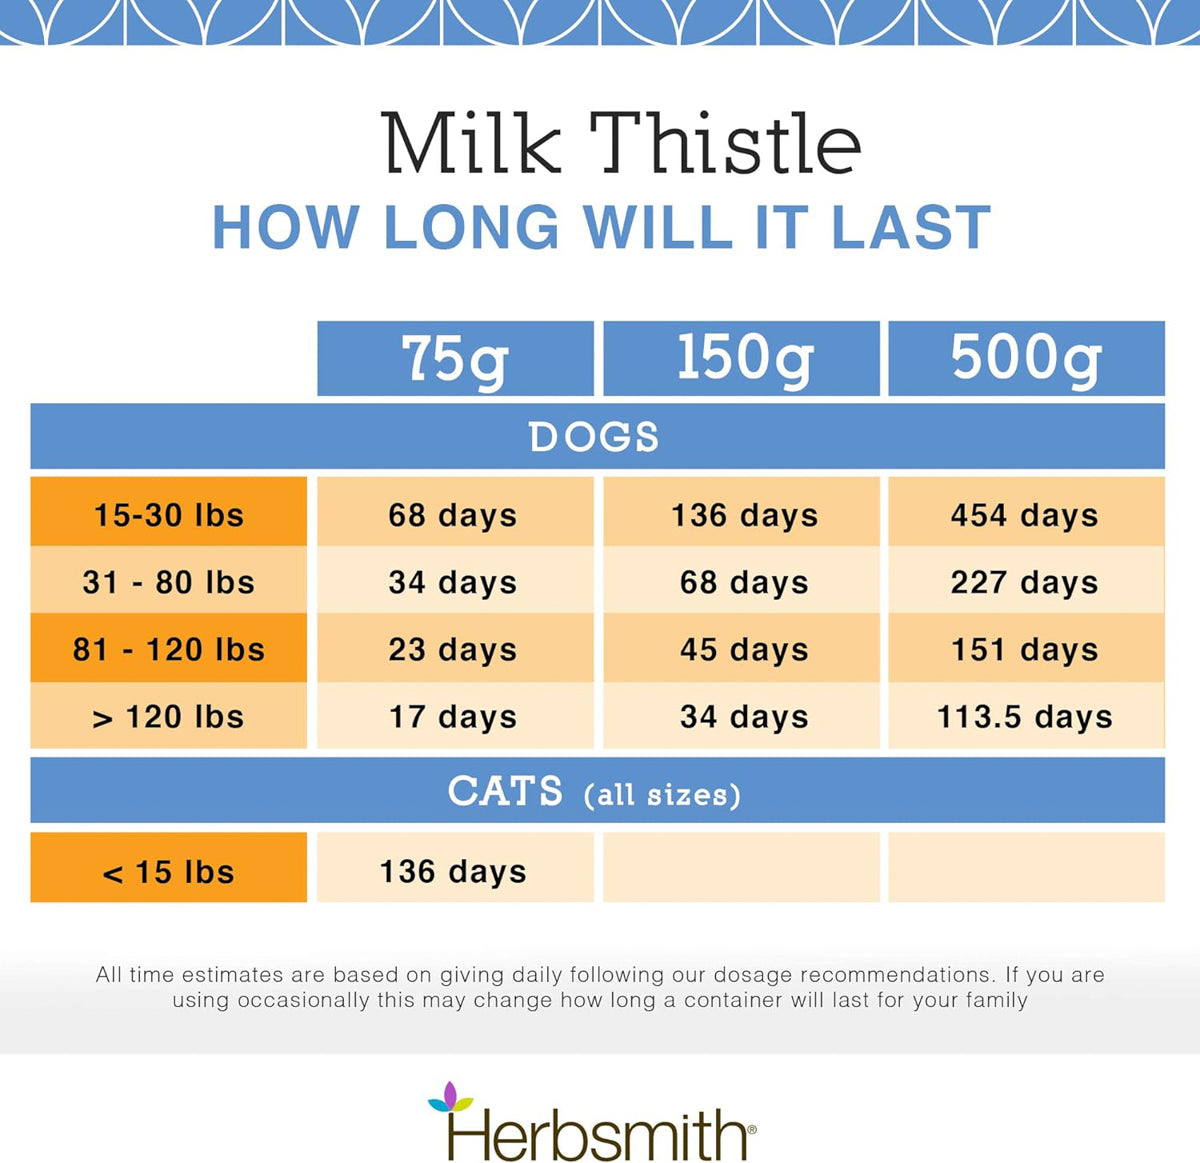 infographic showing how long milk thistle liver support for dogs will last 